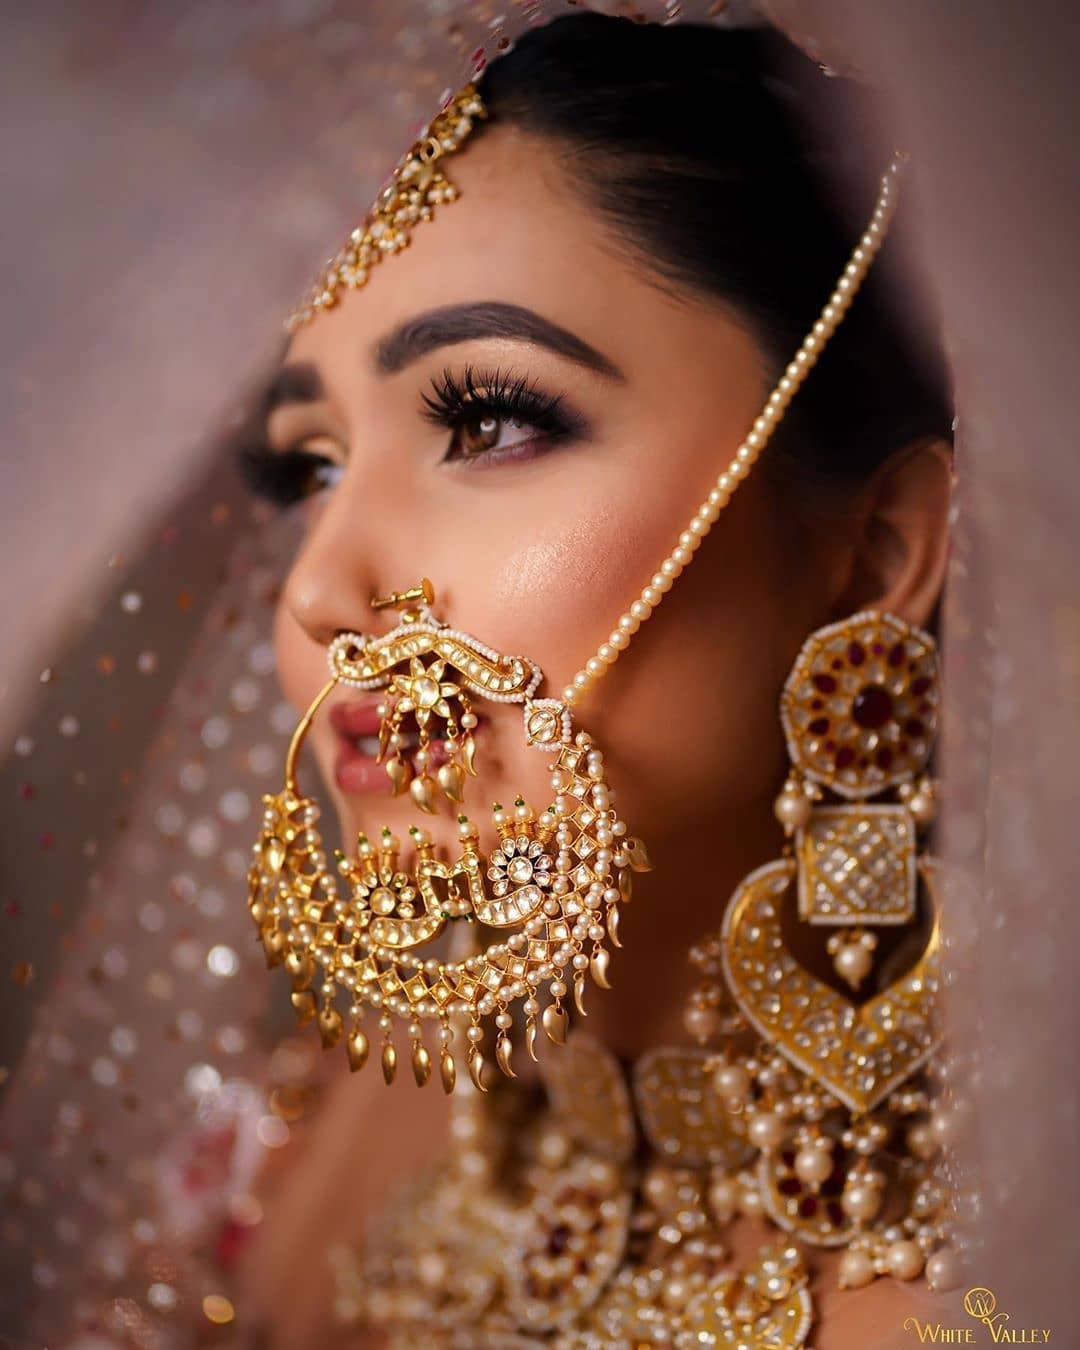 Guidebook For Brides: Selecting The Right Jewellery